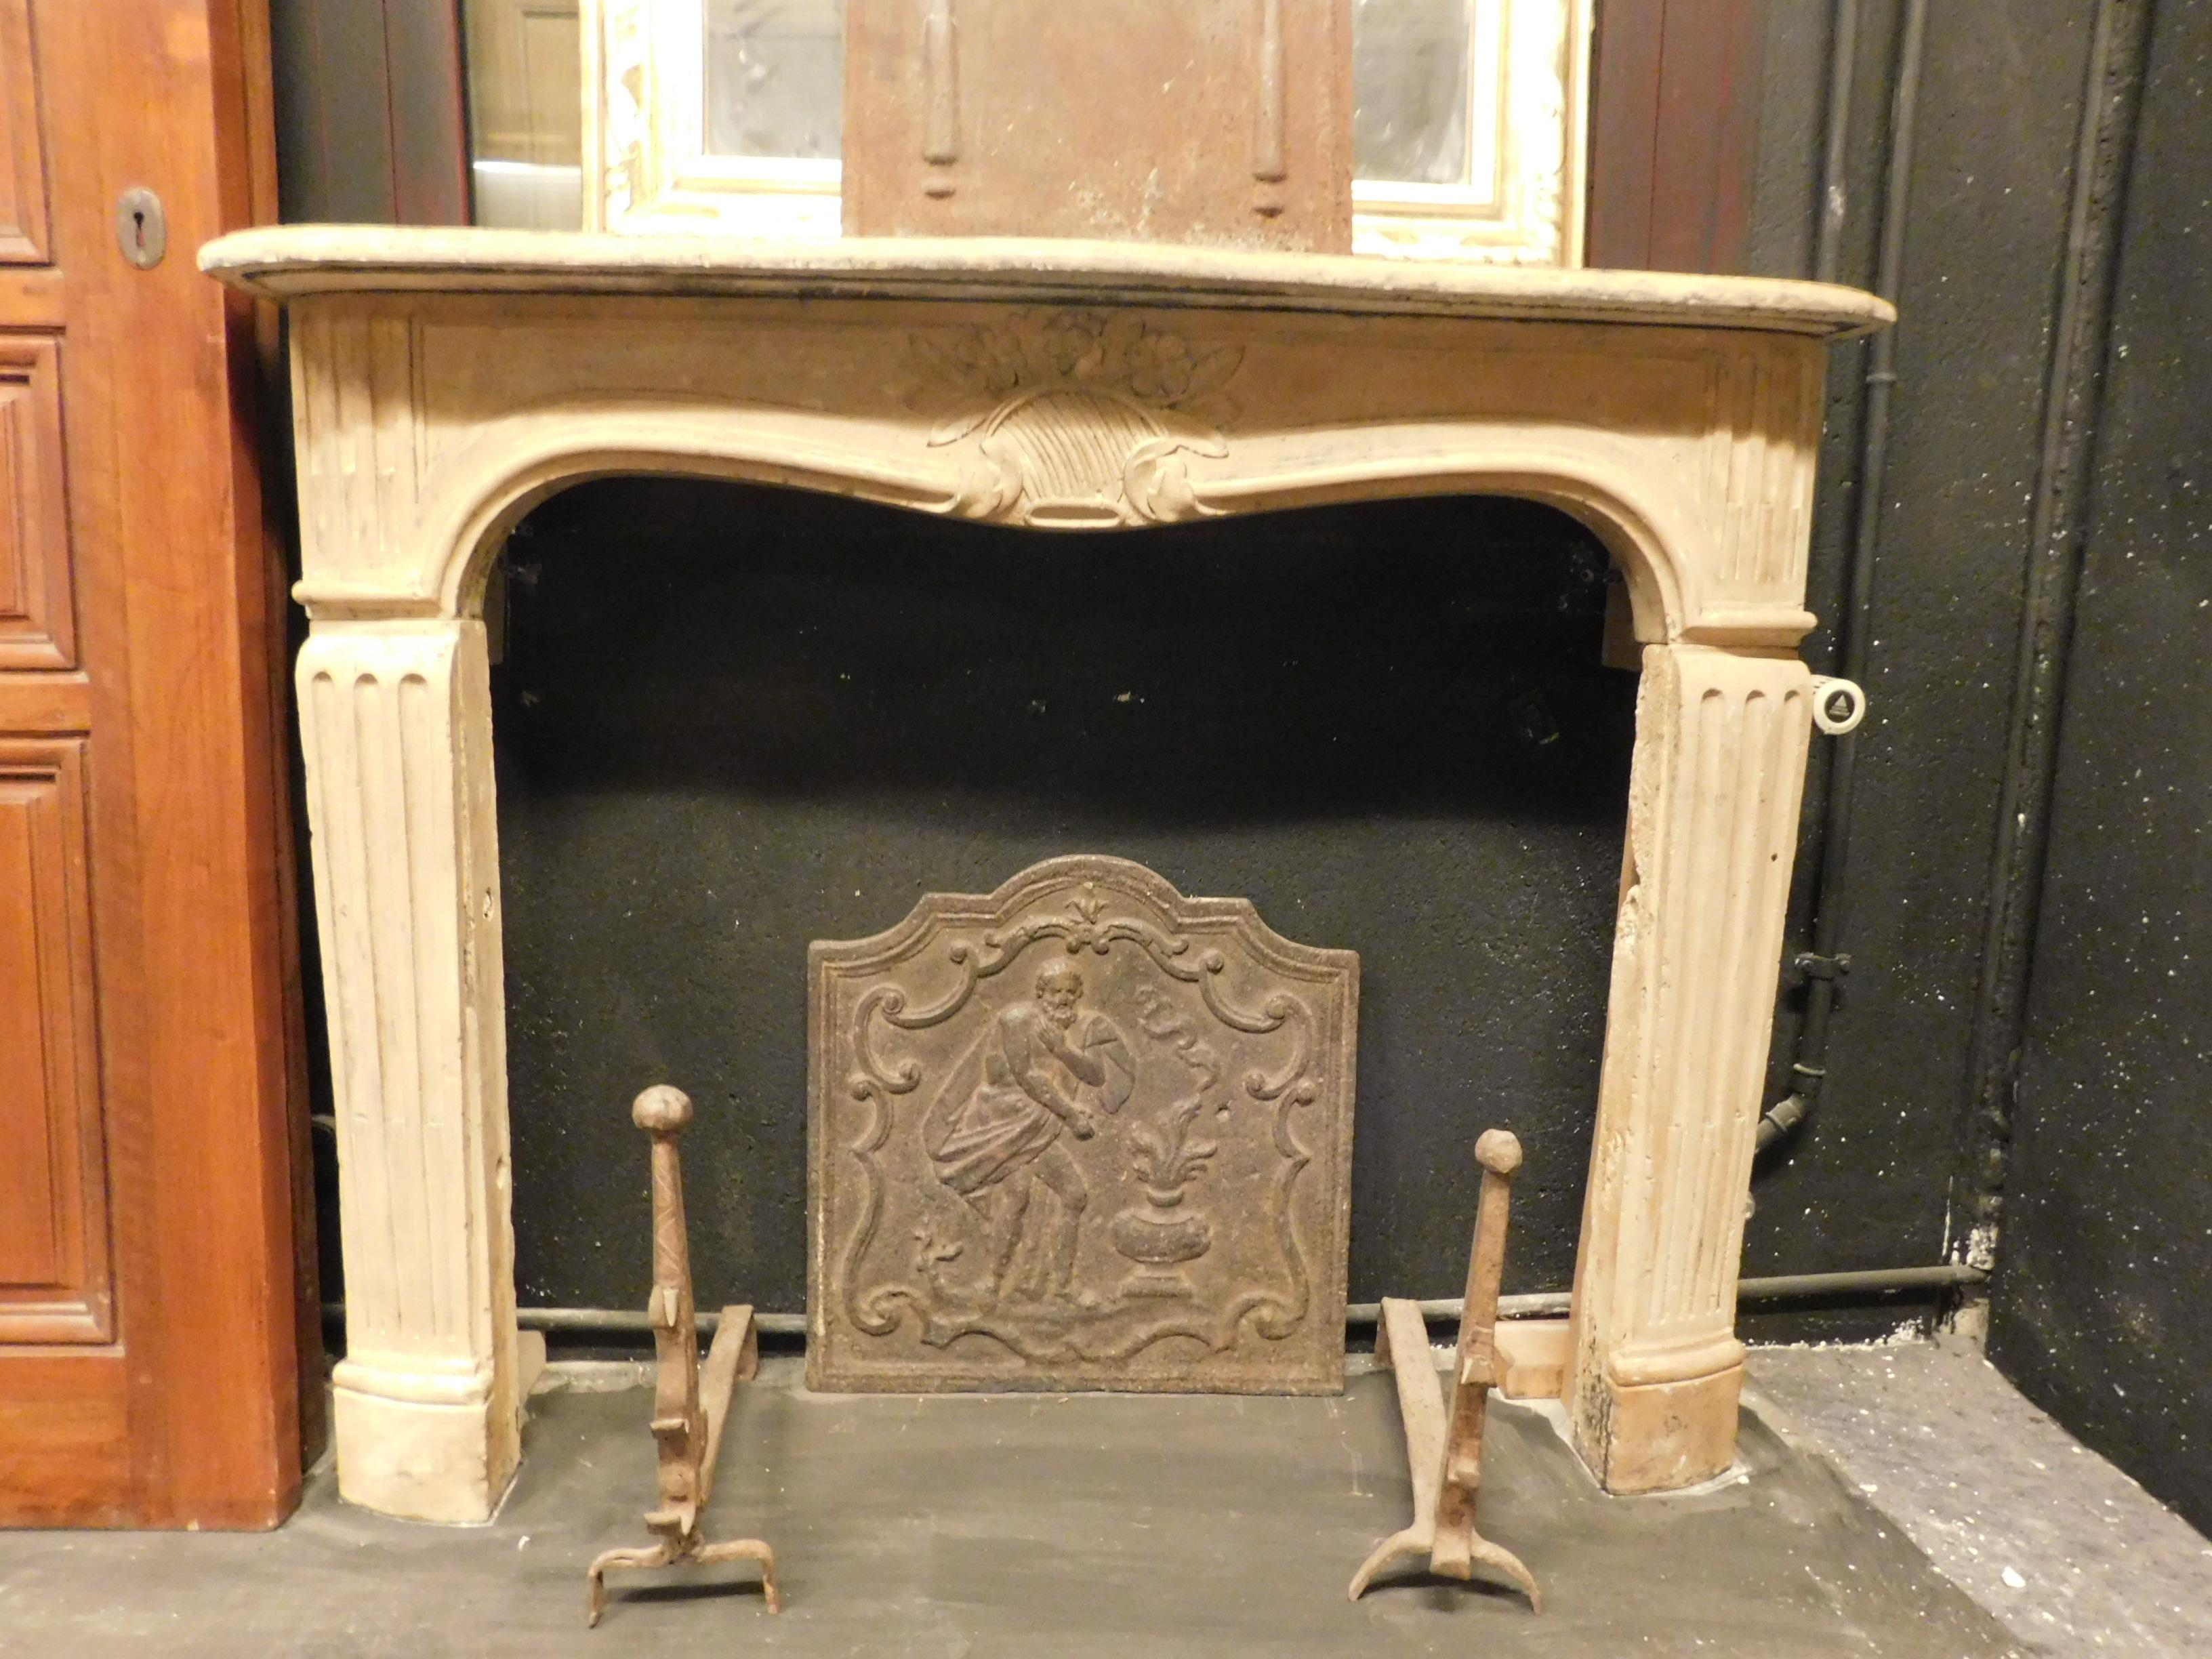 Antique fireplace mantle in yellow Burgundy stone, carved with a central basket of flowers, without sides because it was set in the wall, built in the 18th century in France.
Ideal for decorating your corner of warmth with taste and historical